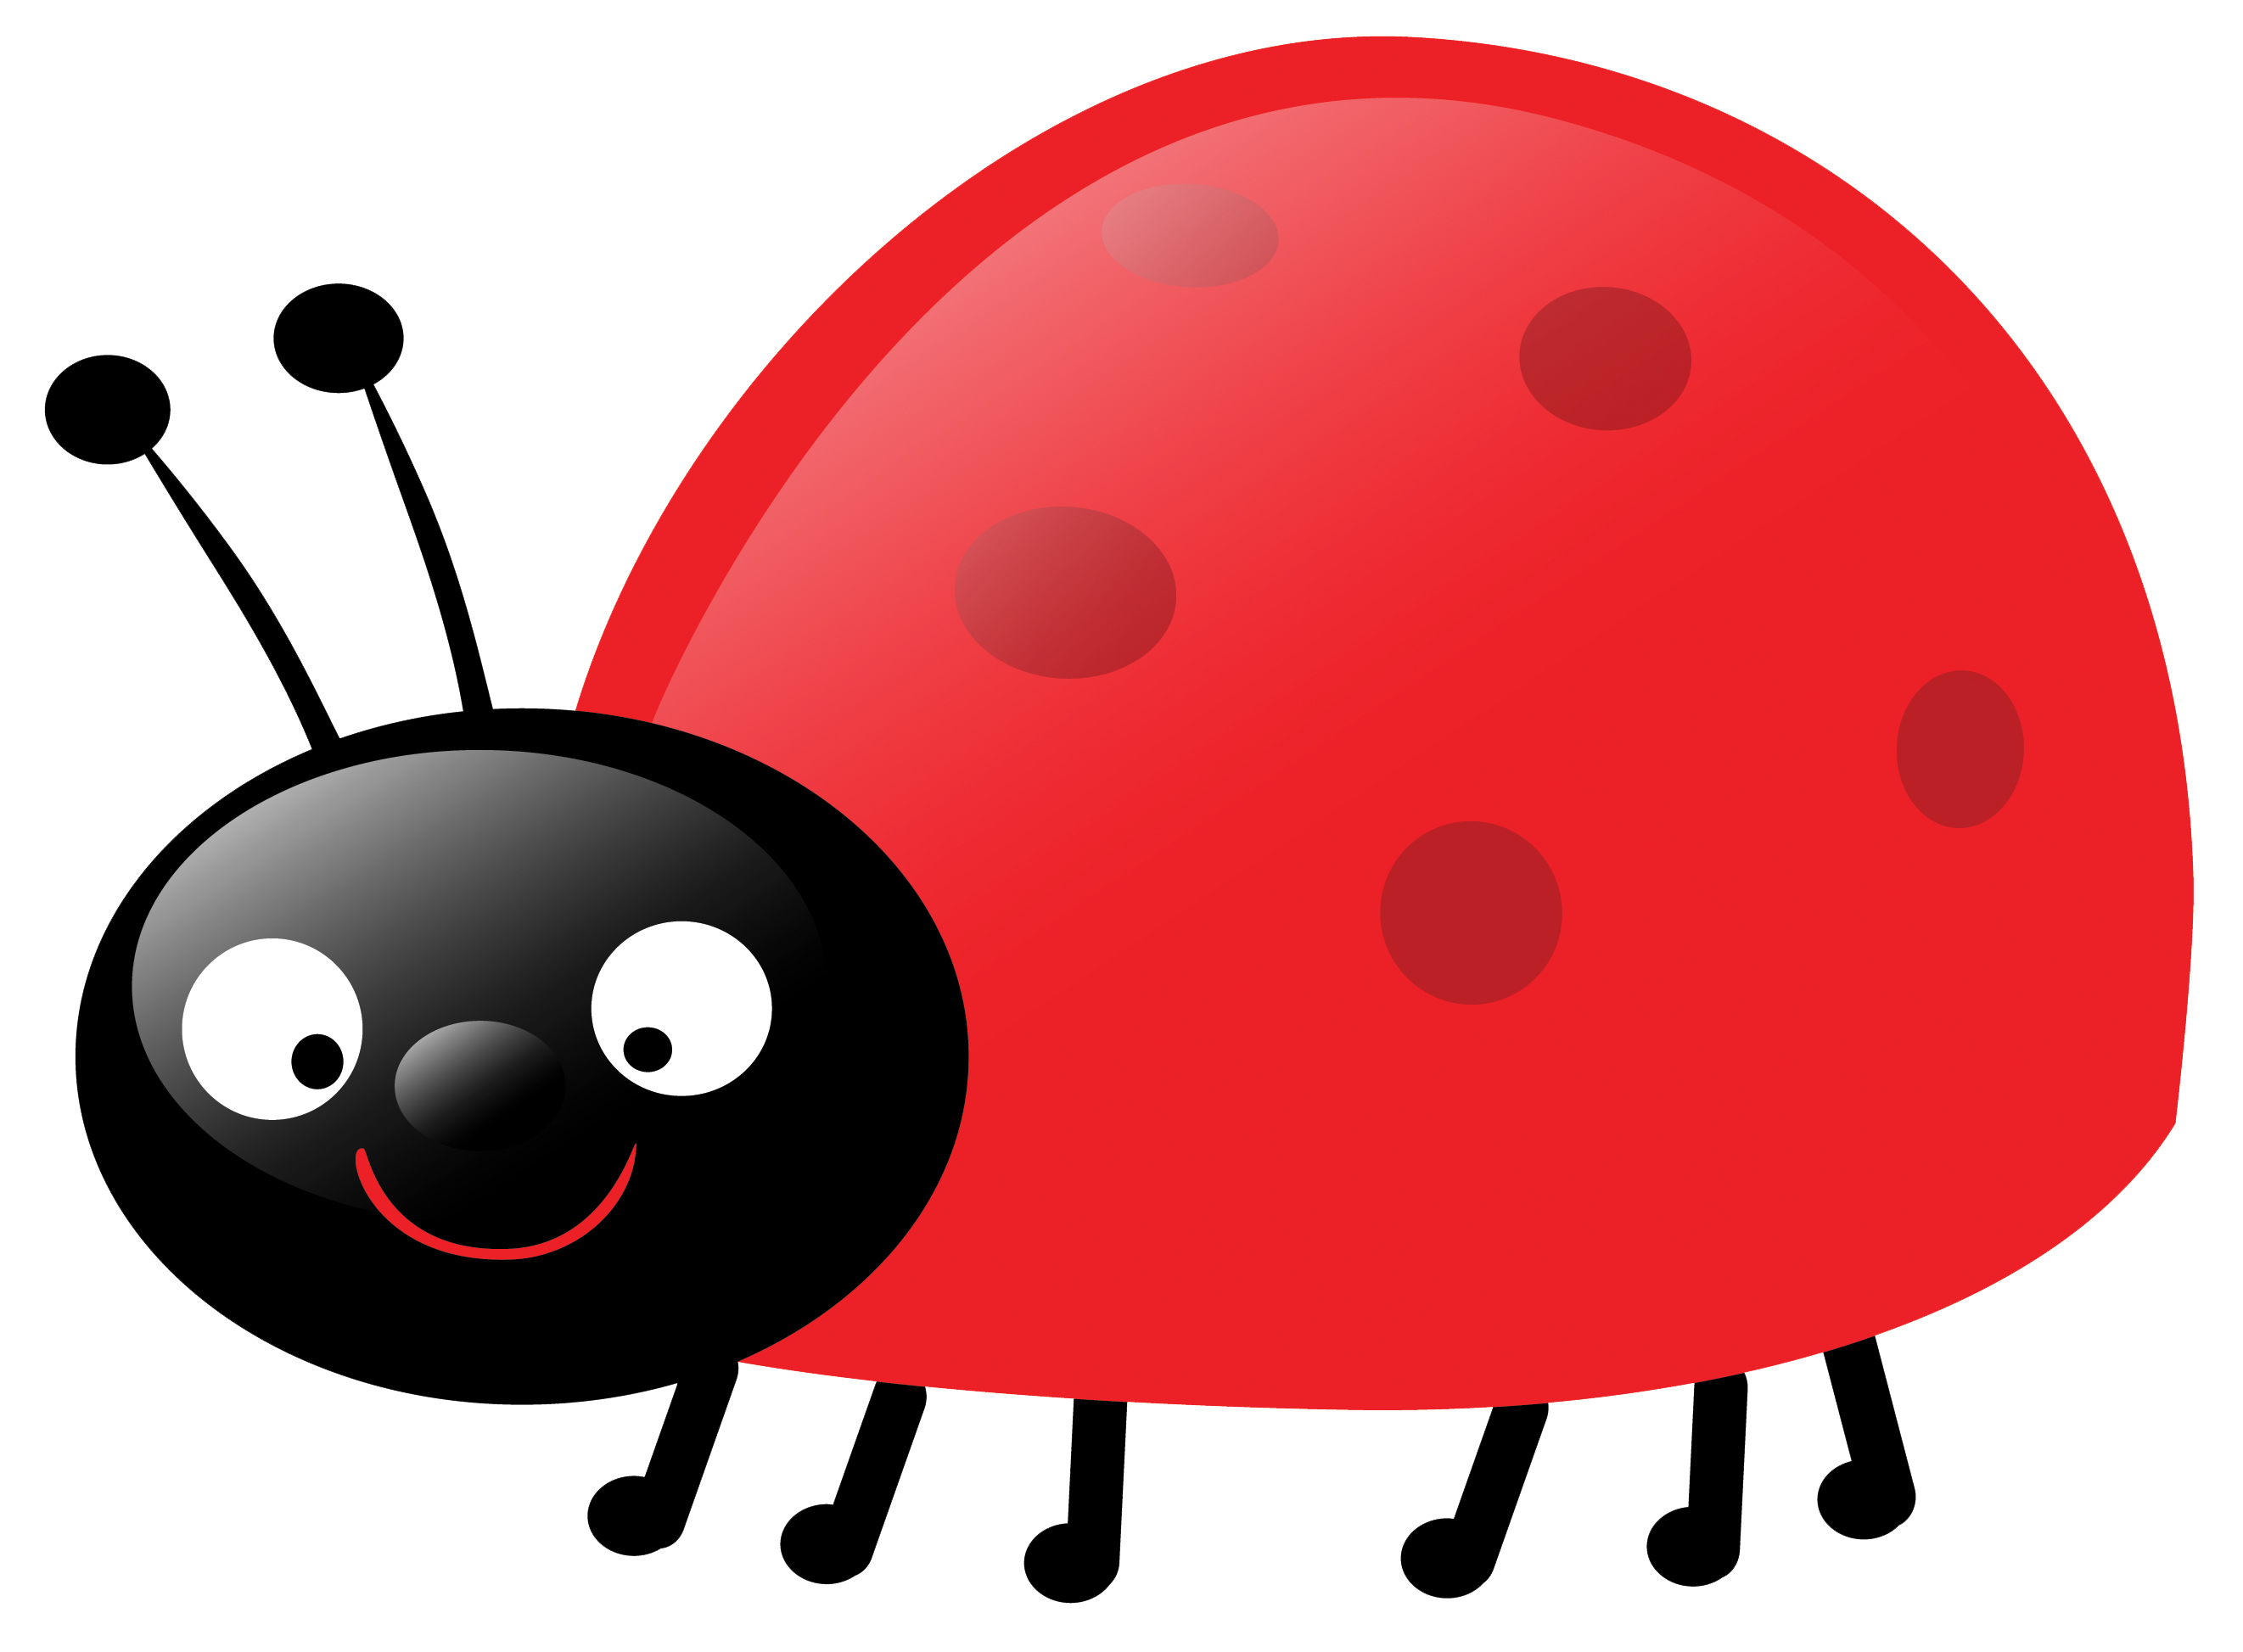 ladybug-outline-related-keywords-clipart-3-wikiclipart